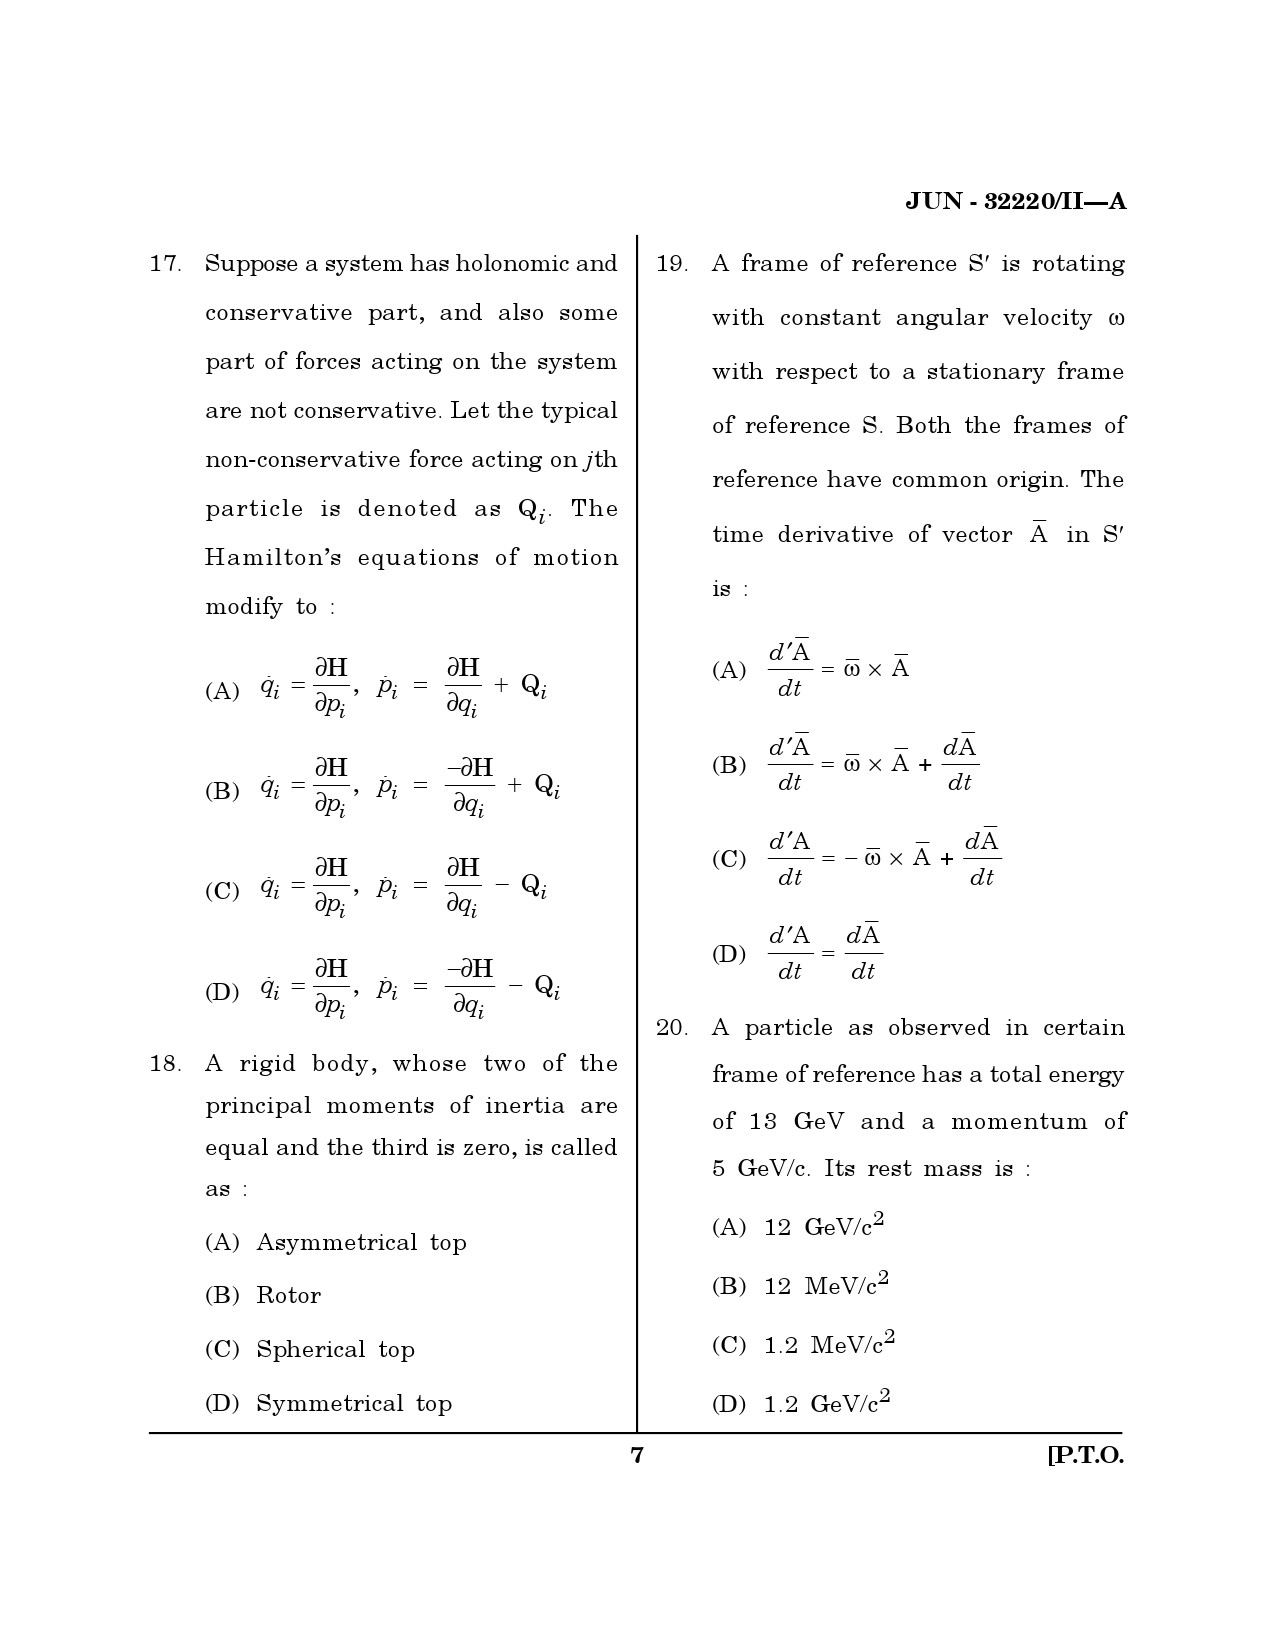 Maharashtra SET Physical Science Question Paper II June 2020 6